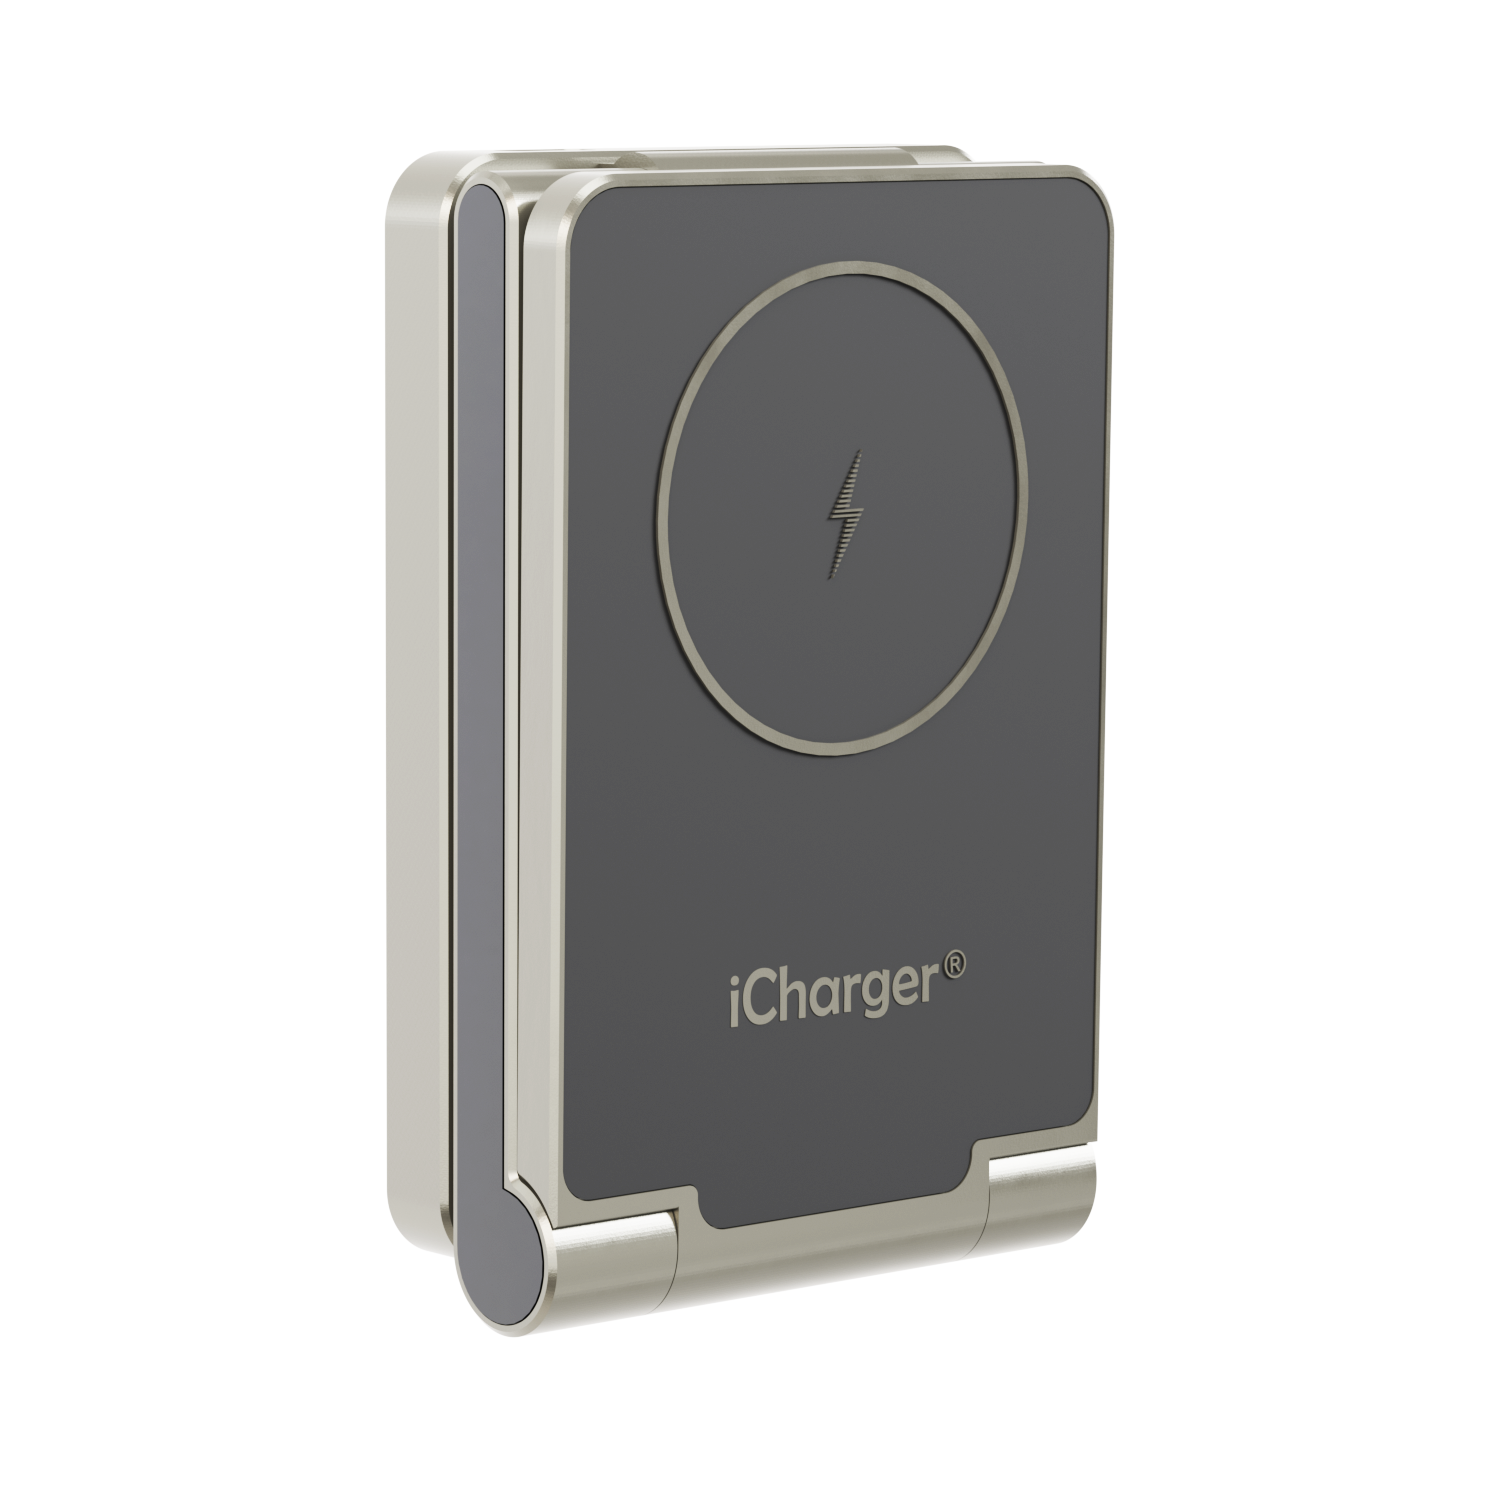 Compact iCharger MagSafe Hybrid Pro wireless charger in a folded, space-saving design featuring the signature MagSafe charging ring and the iCharger logo, tailored for efficient charging on the go.